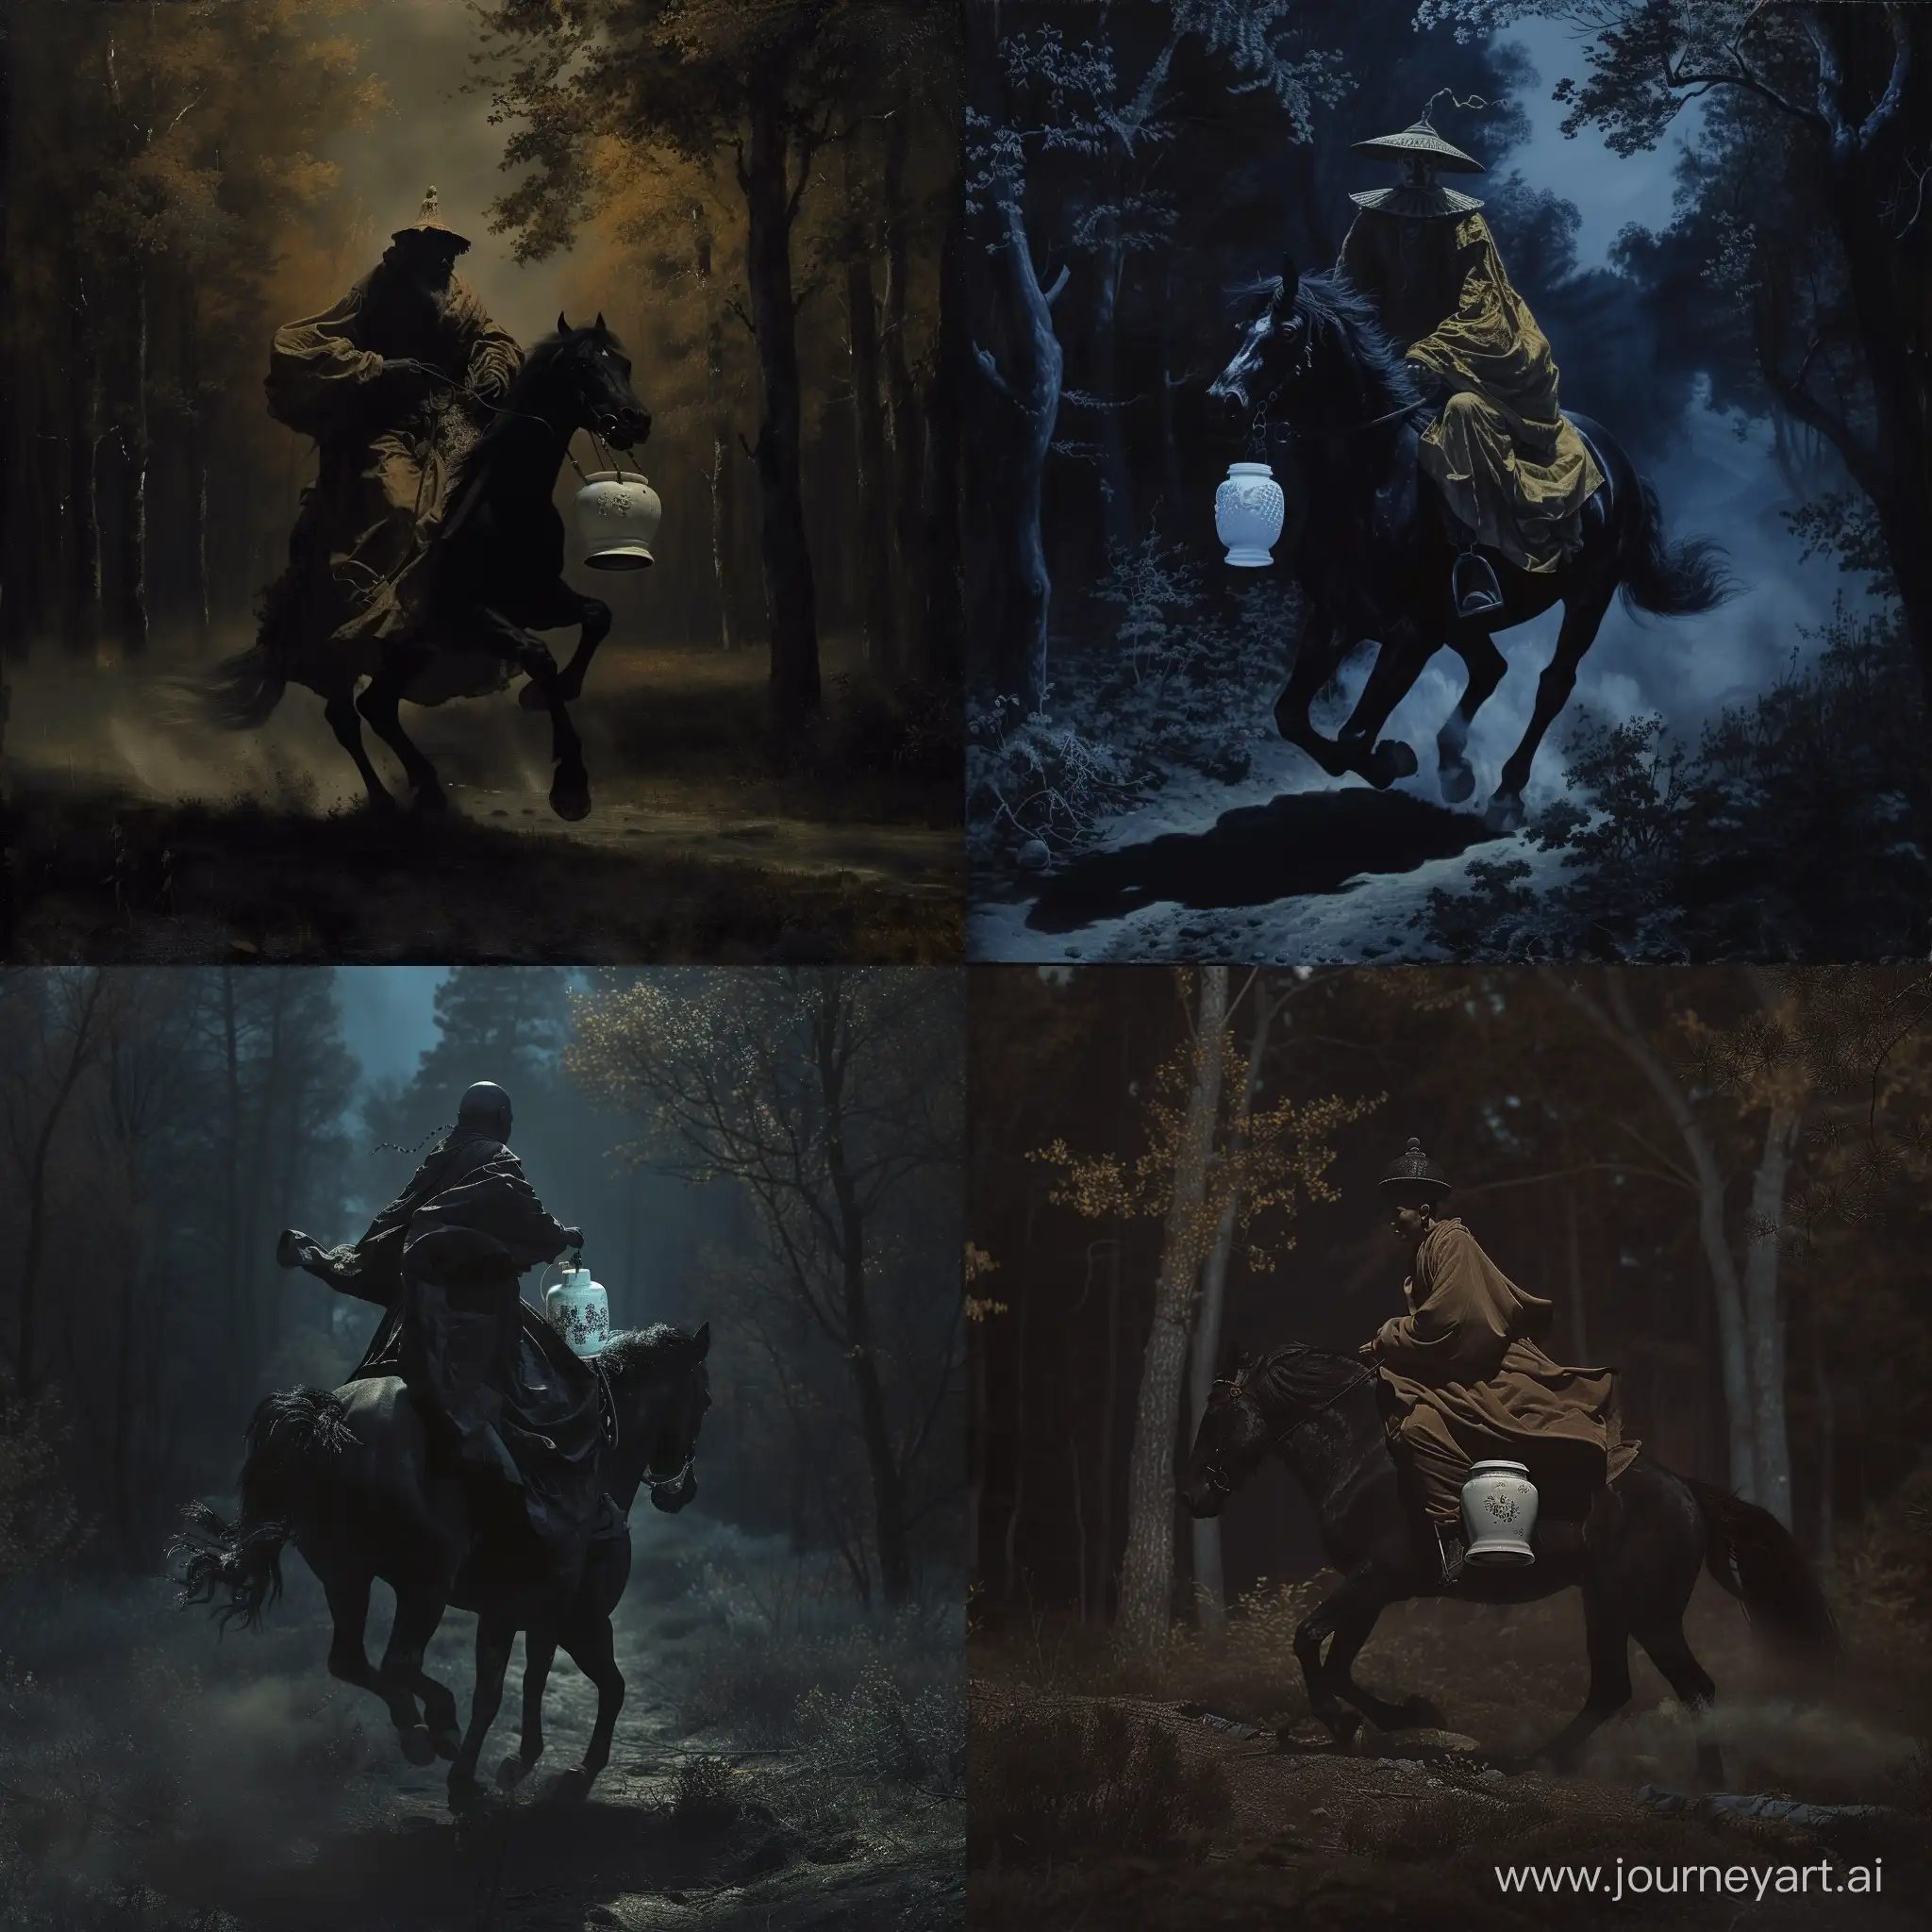 A mysterious monk rides his black horse running through the dark forest at night, carrying a white Chinese jar with ashes inside , rembrandt light --v 6.0